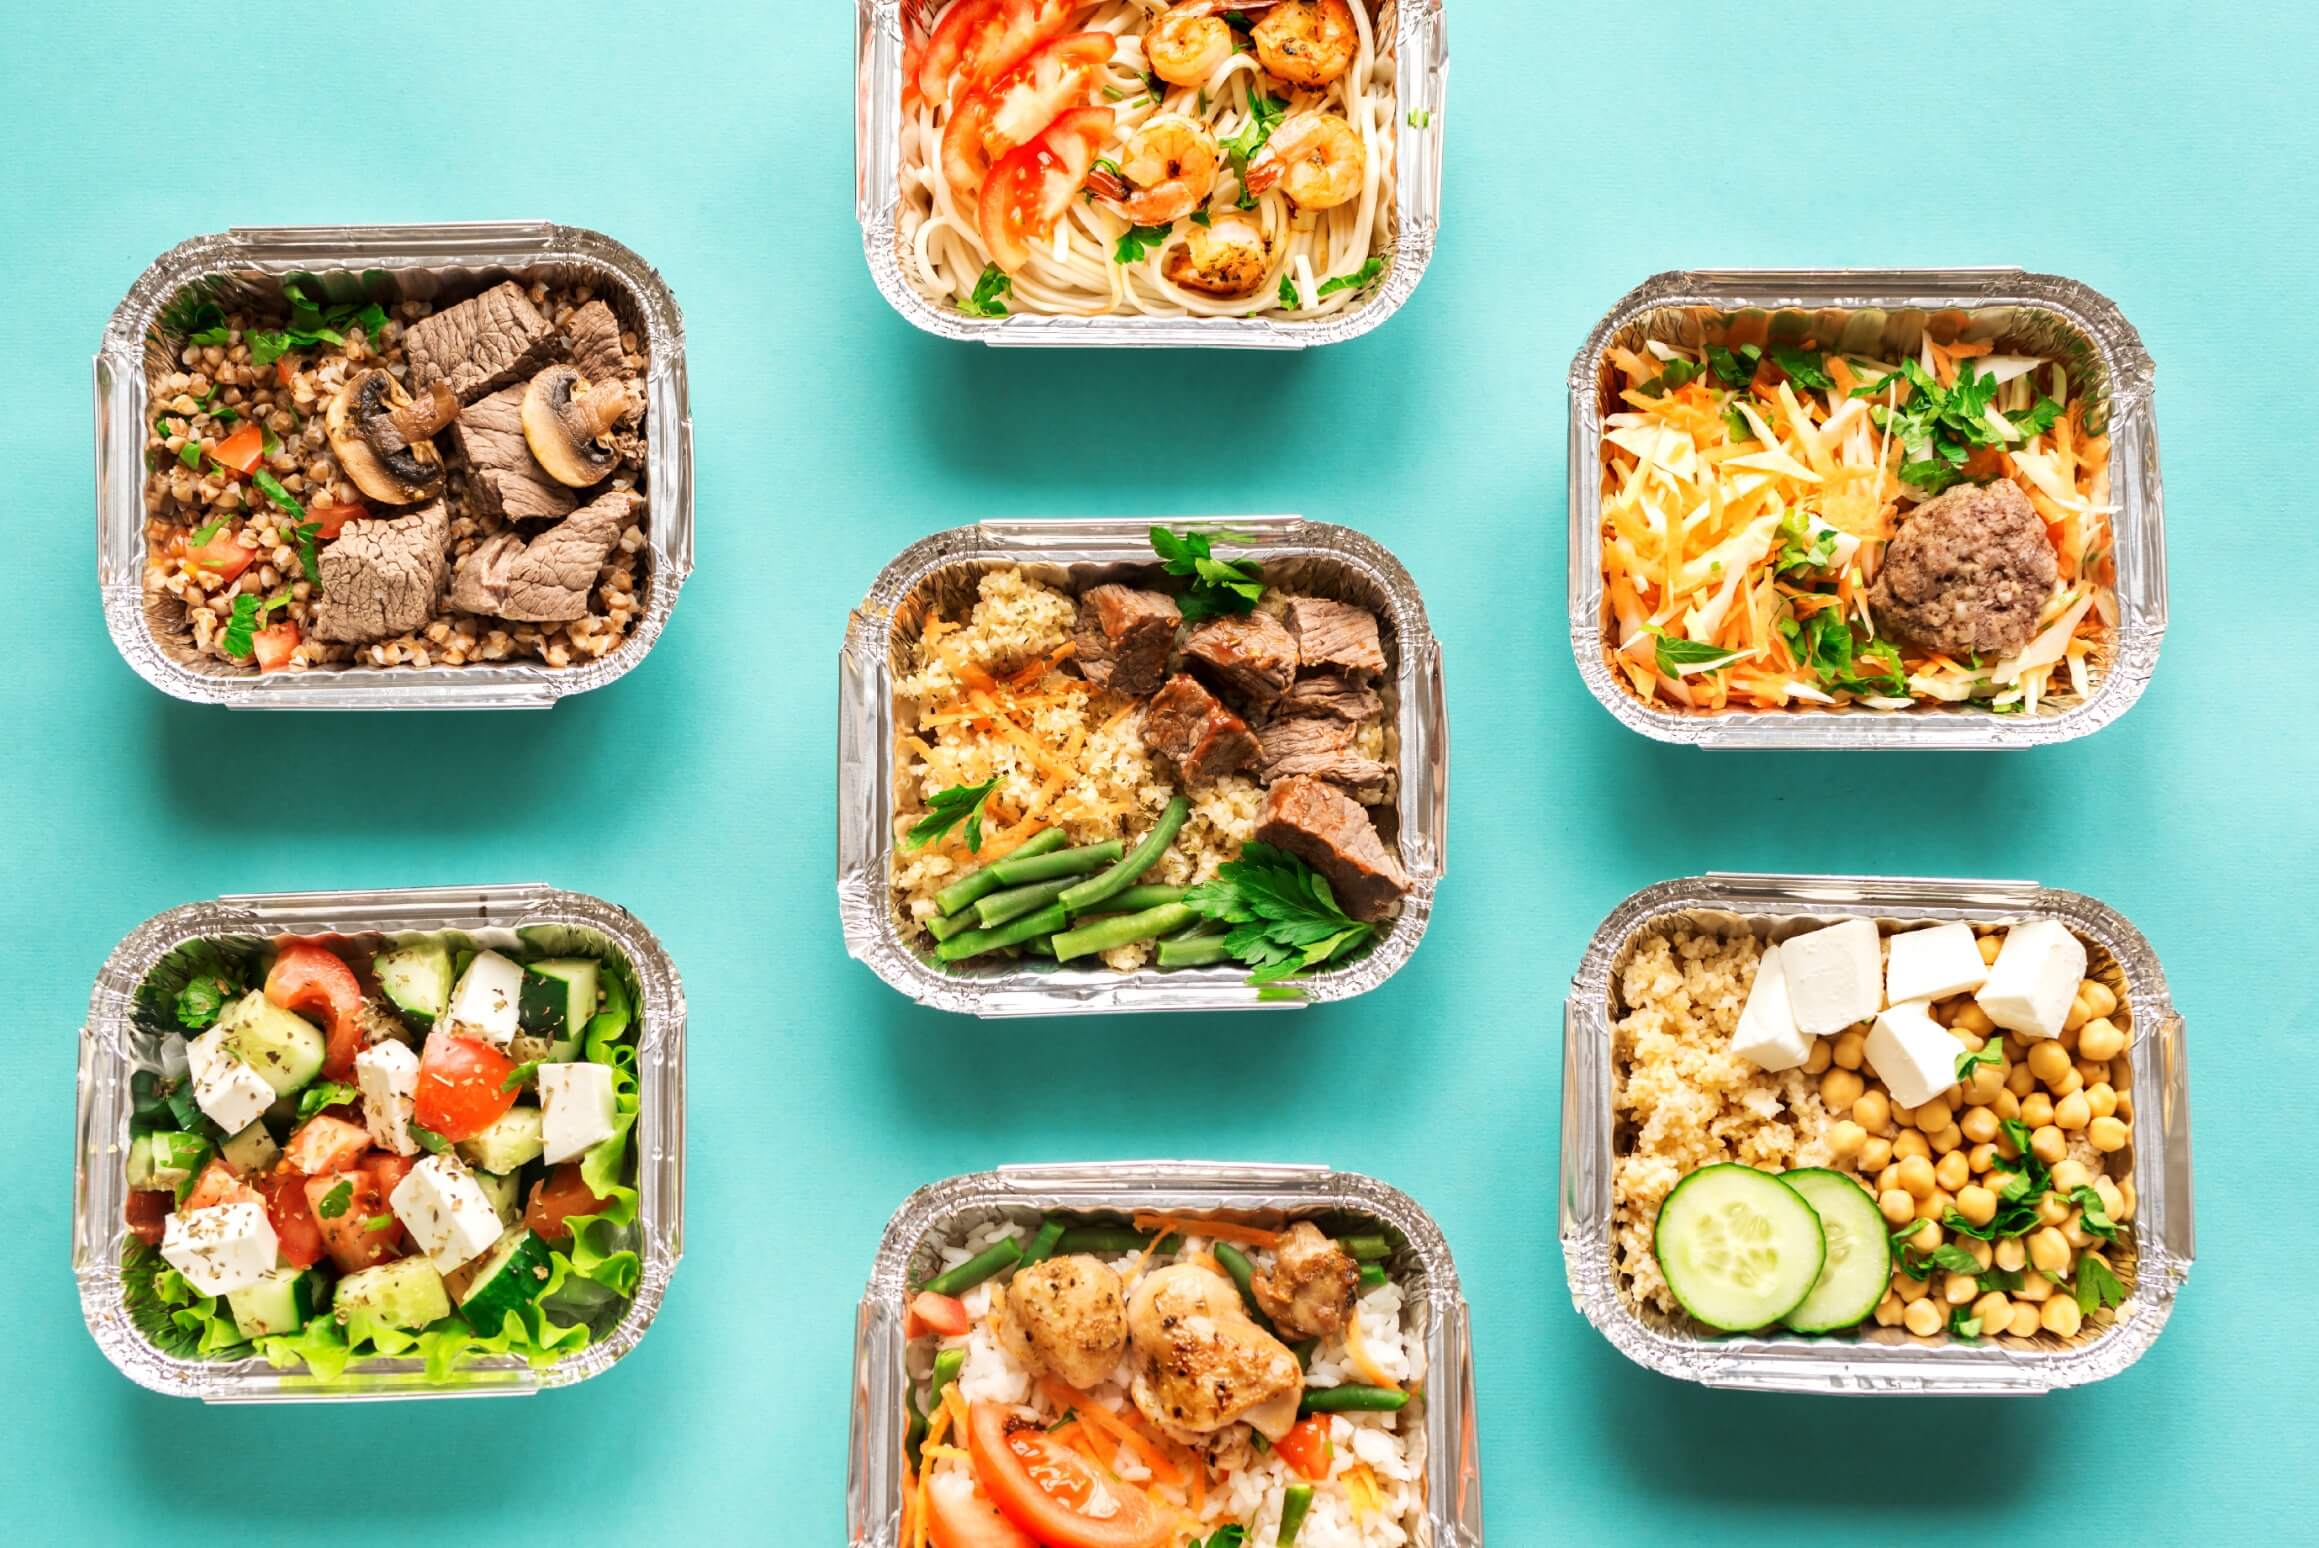 Best Food Meal Prep Delivery Services 2021